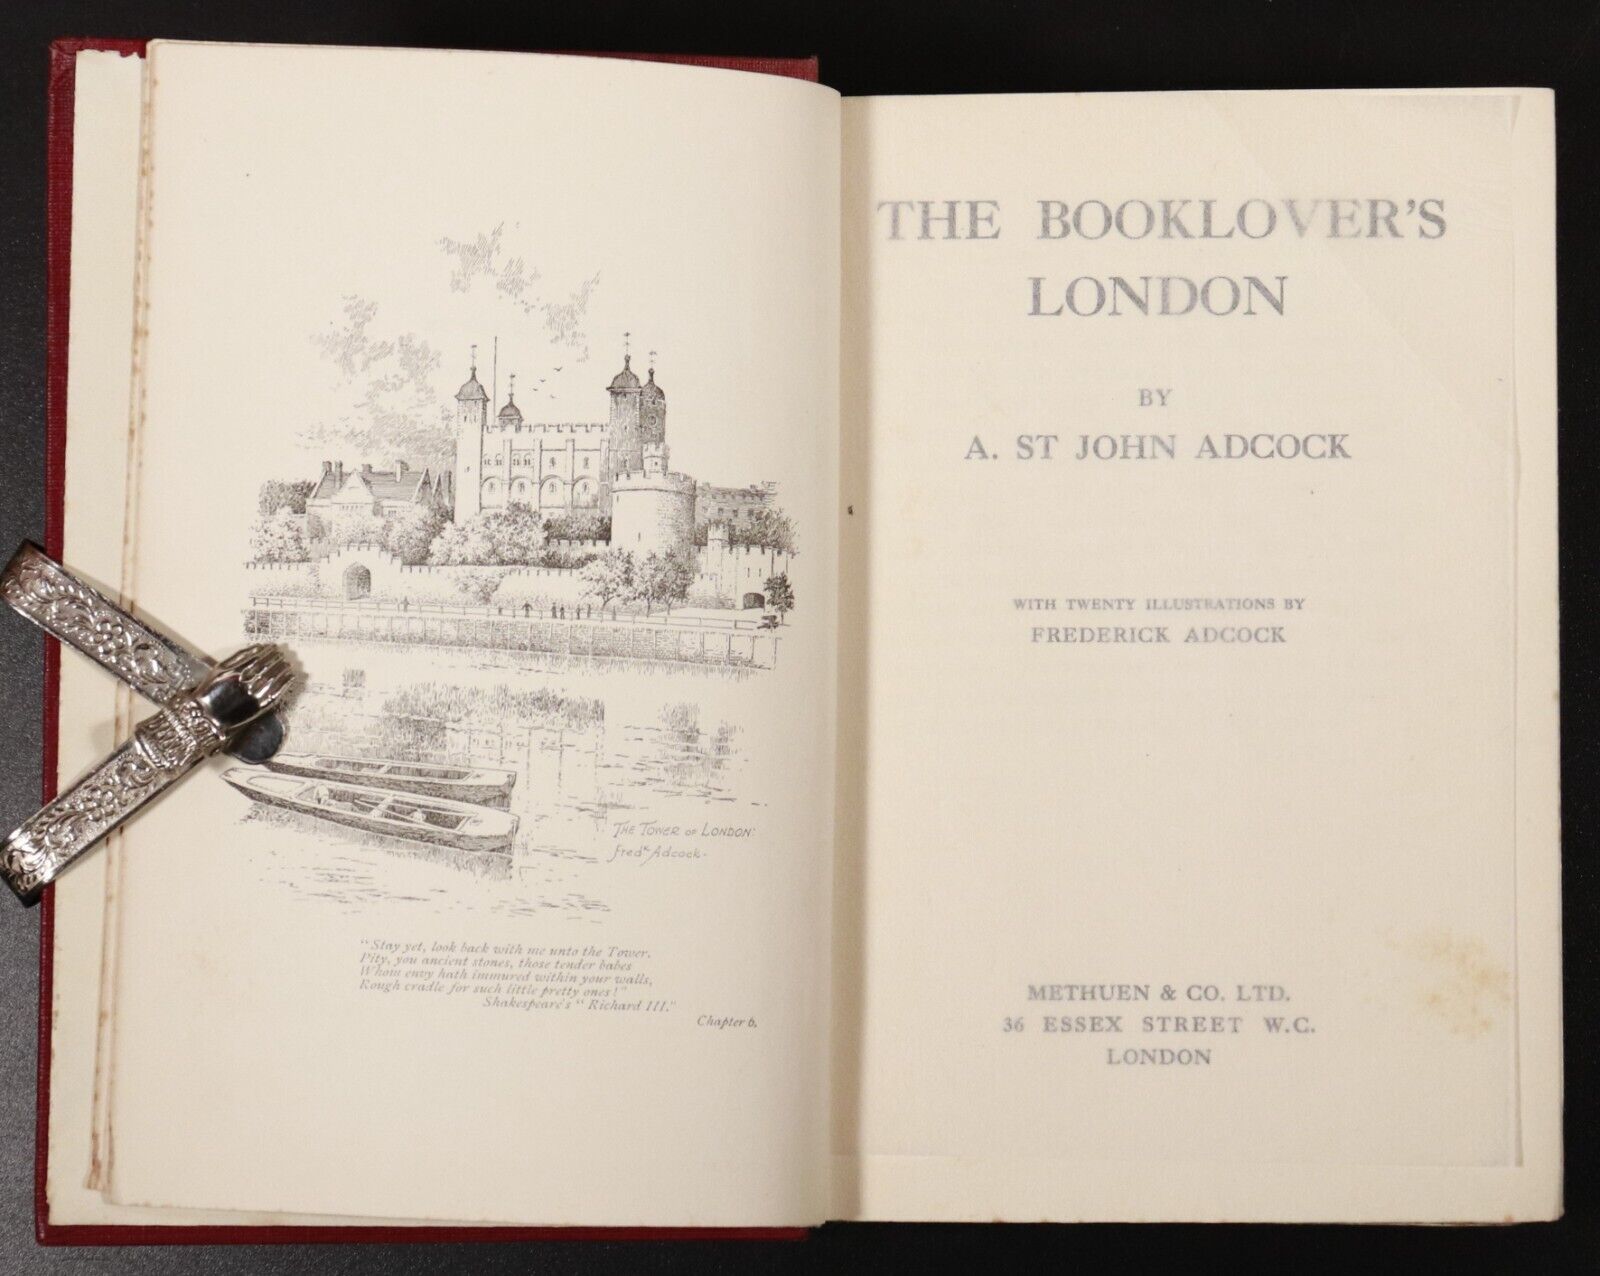 1913 The Booklovers London by A. St John Adcock Antique British History Book - 0